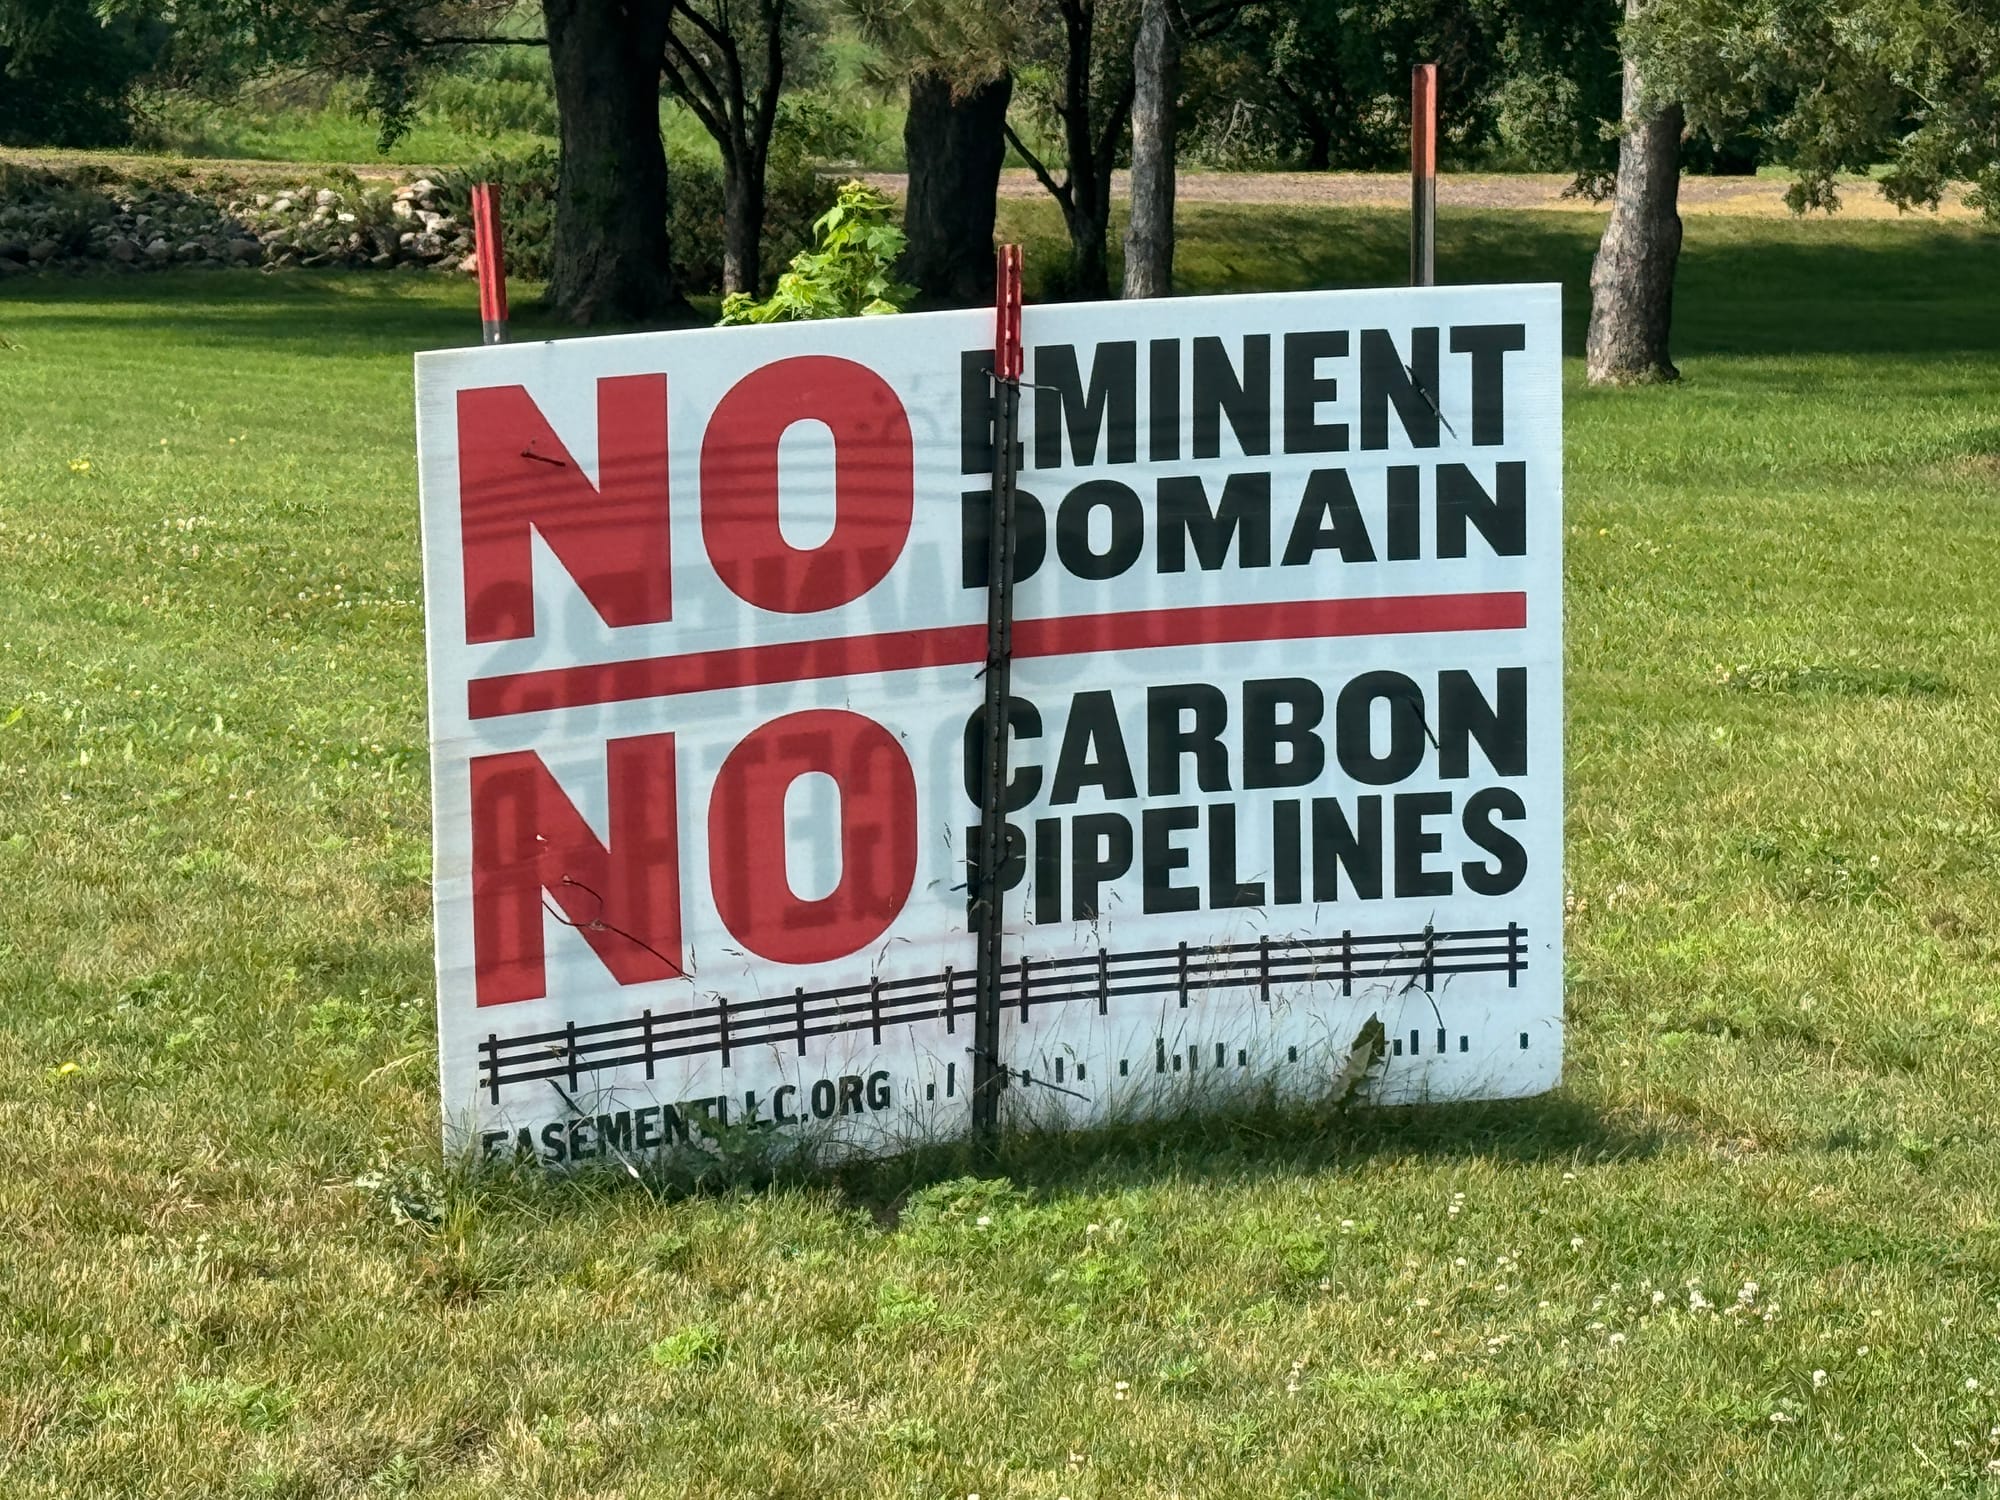 "No Eminent Domain, No Carbon Pipelines" sign in a grassy field